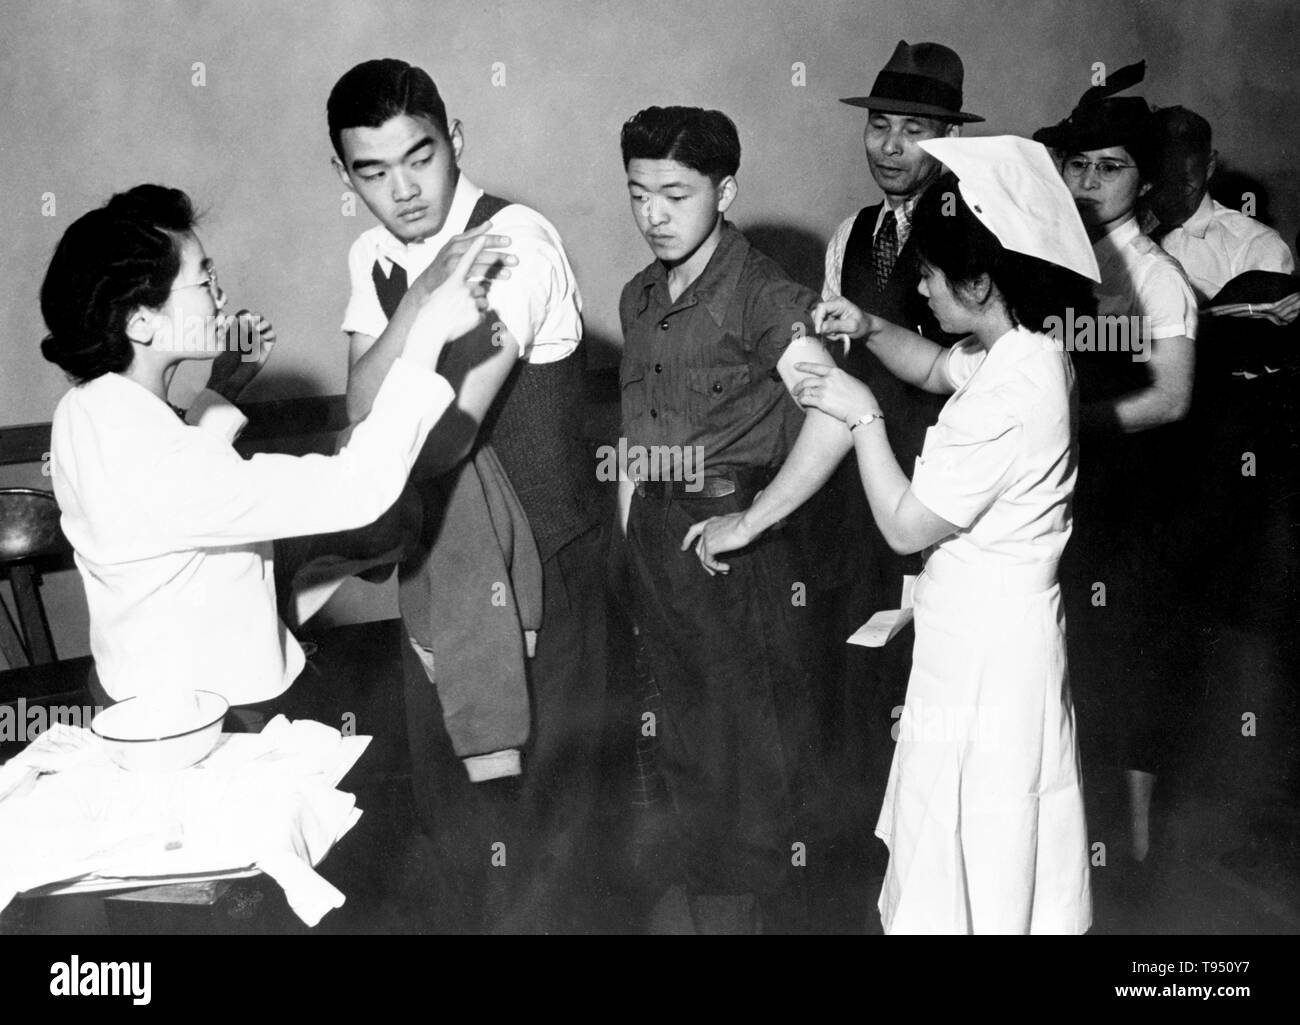 Entitled: 'Evacuees of Japanese descent being inoculated as they register for evacuation.' The internment of Japanese-Americans during WWII was the forced relocation and incarceration in camps of 110,000-120,000 people of Japanese ancestry (62% of the internees were US citizens) ordered by President Roosevelt shortly after Japan's attack on Pearl Harbor. Japanese-Americans were incarcerated based on local population concentrations and regional politics. Stock Photo